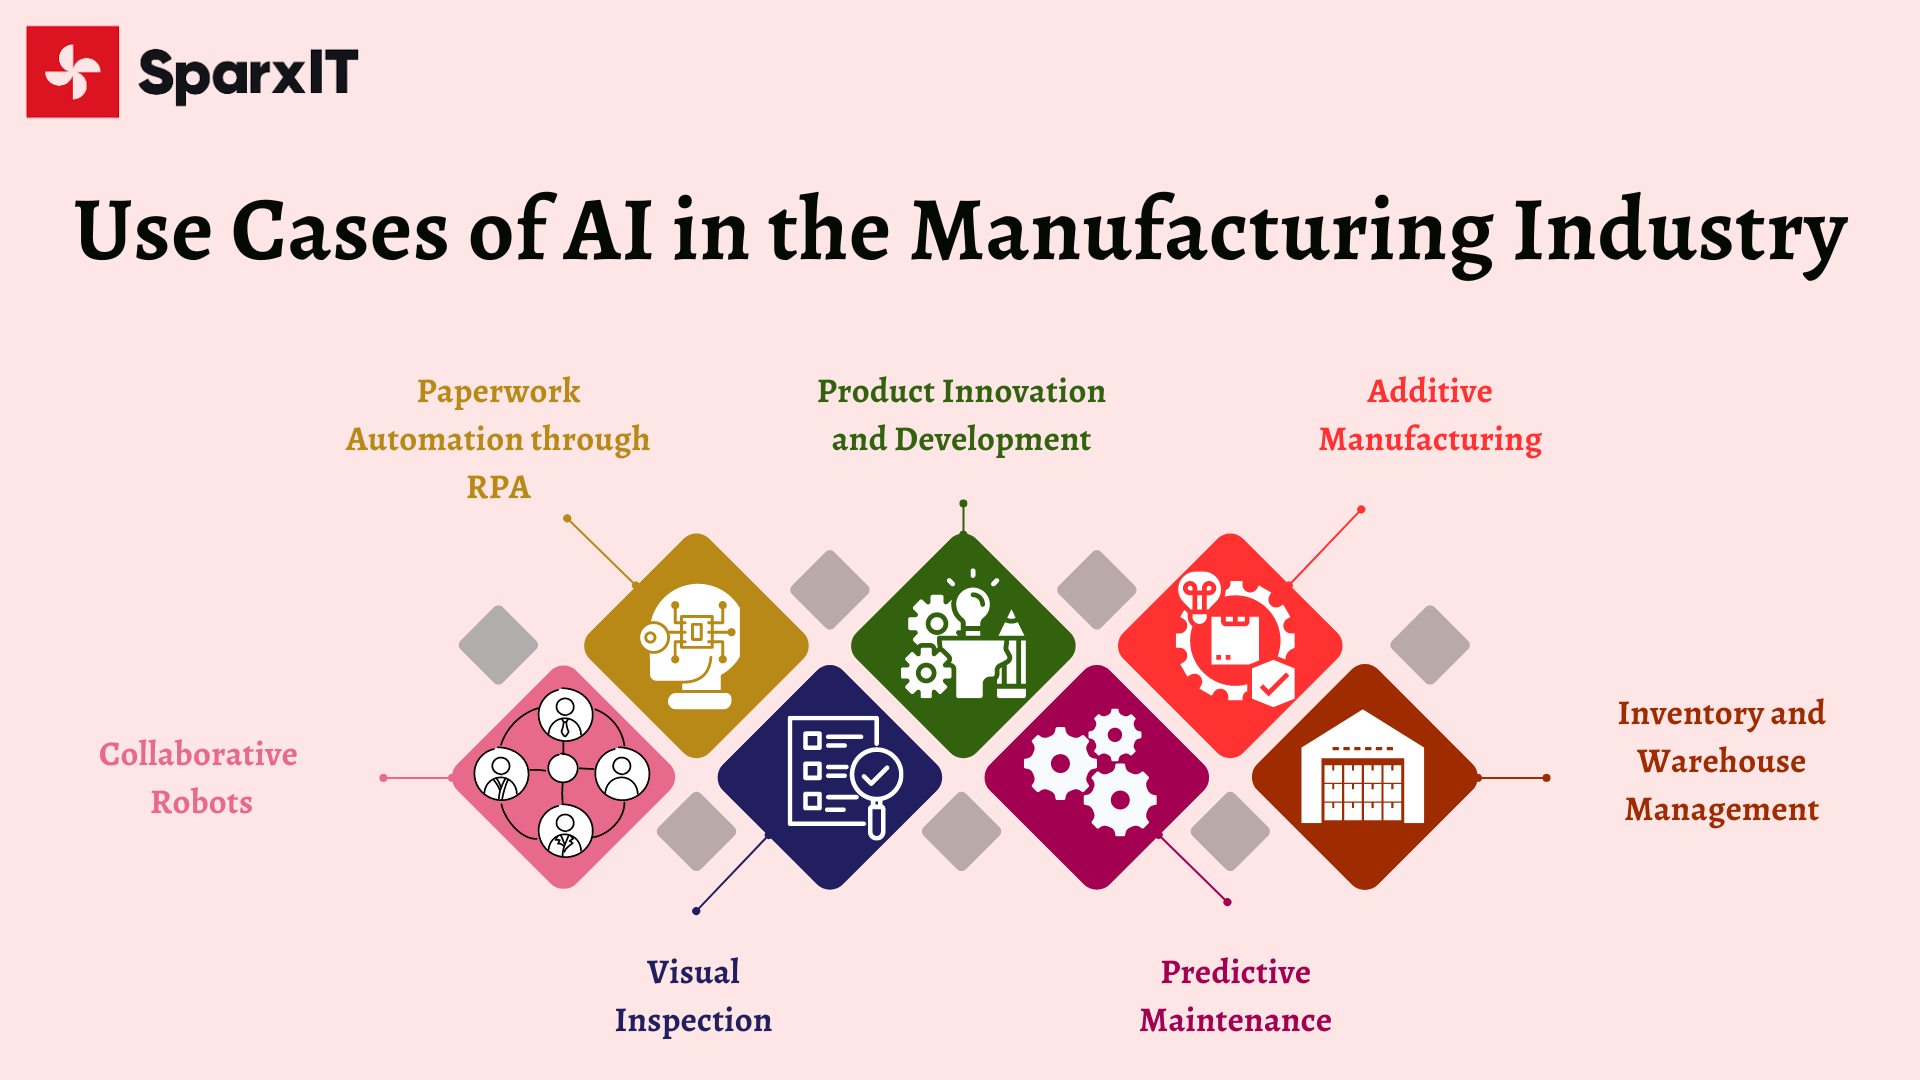 Use Cases of AI in the Manufacturing Industry